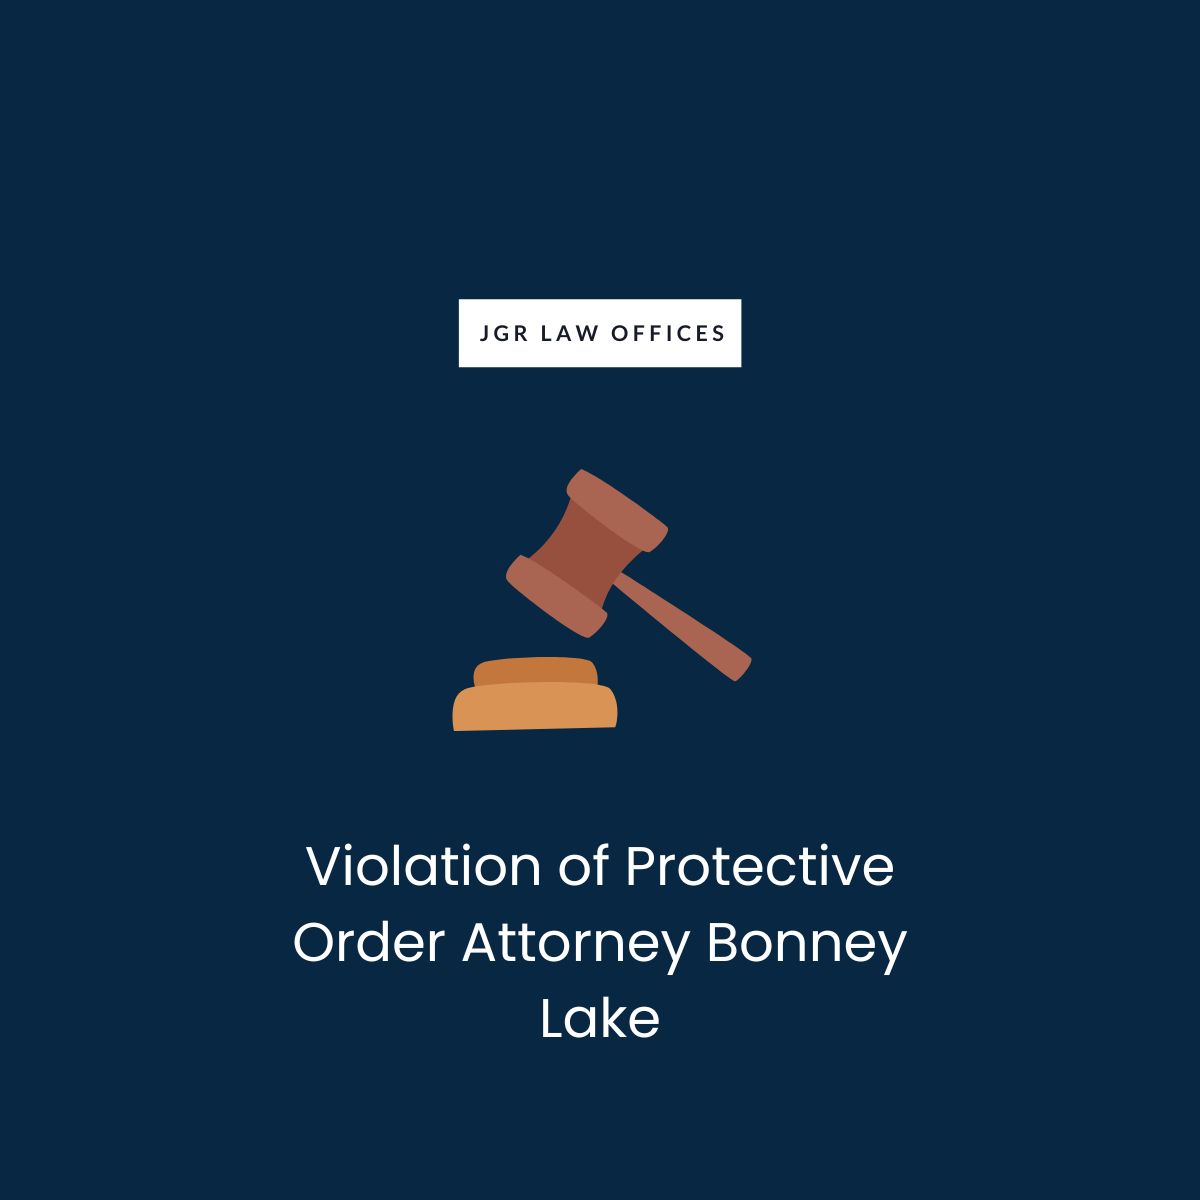 Violation of Protective Order Attorney Bonney Lake